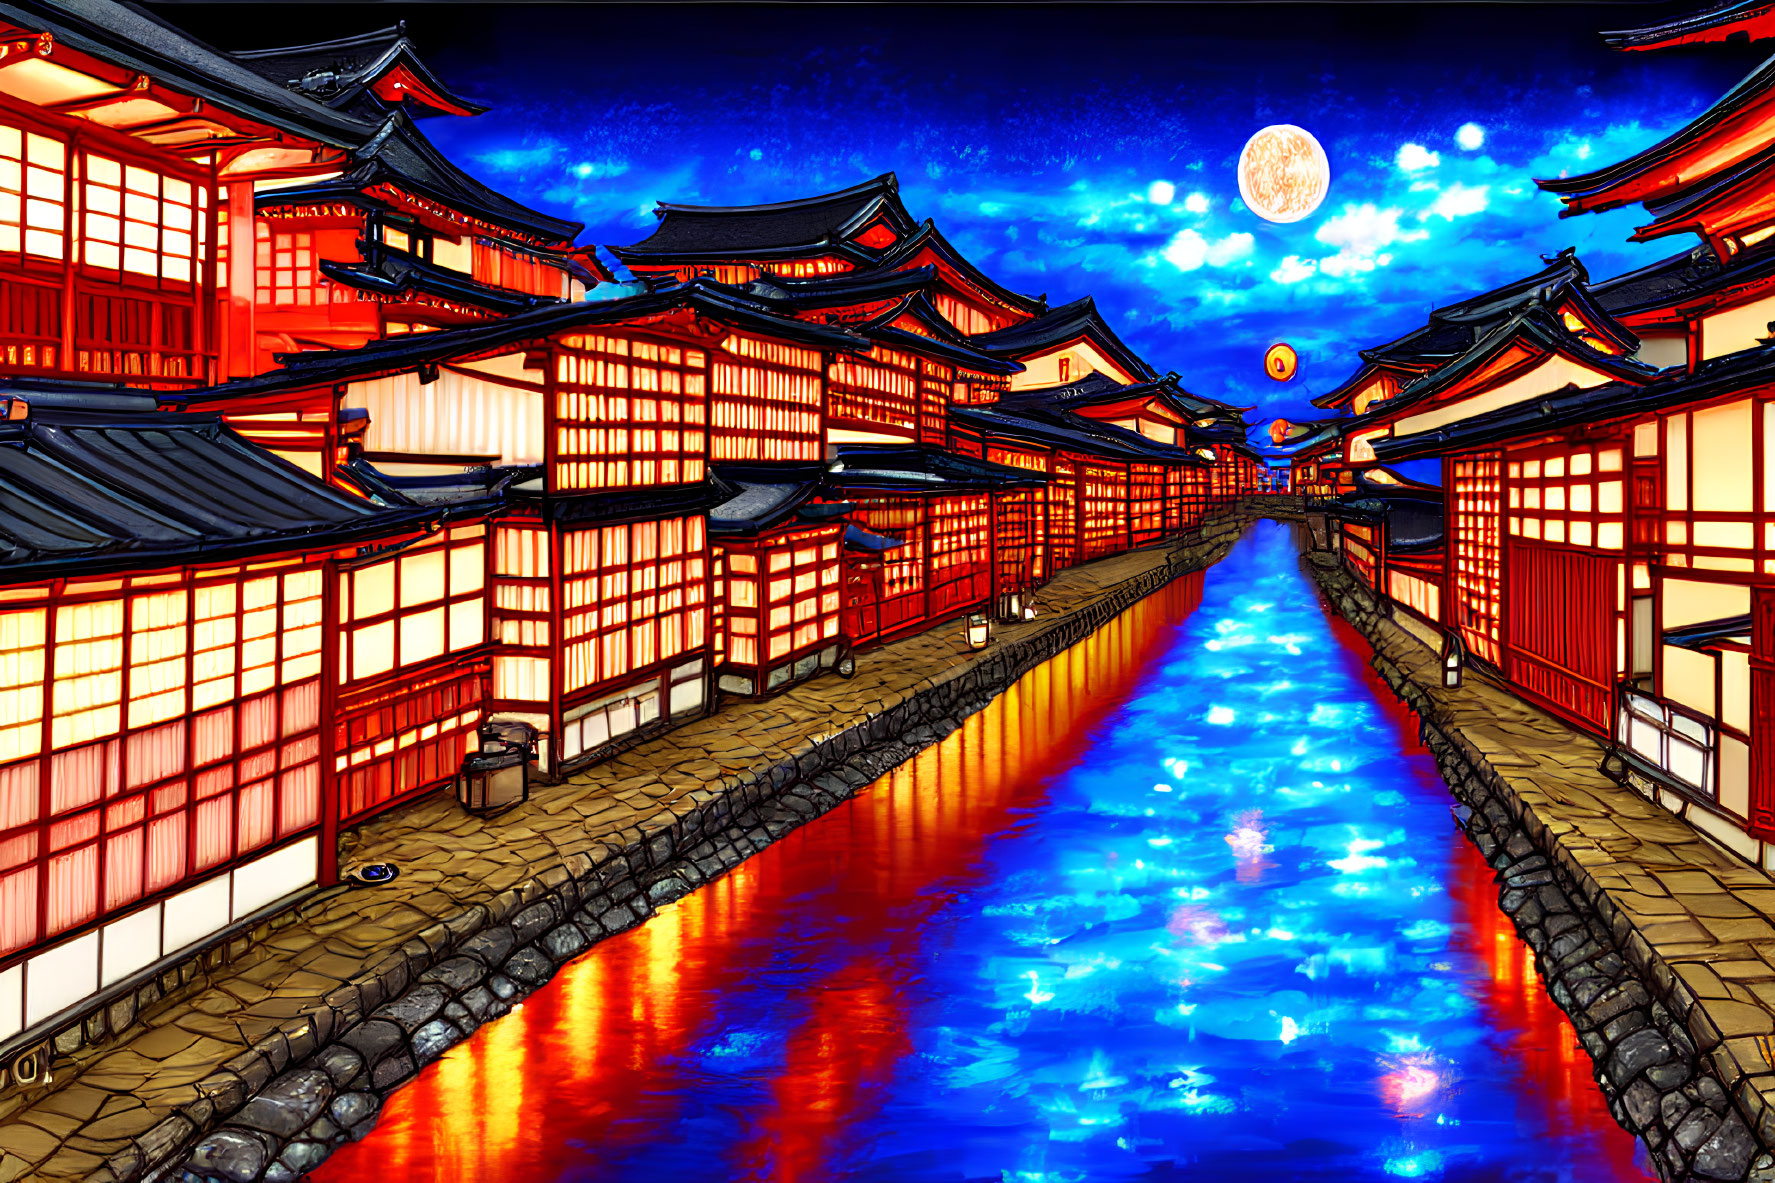 Digital artwork: Traditional Japanese village at night with illuminated buildings and water canal under full moon